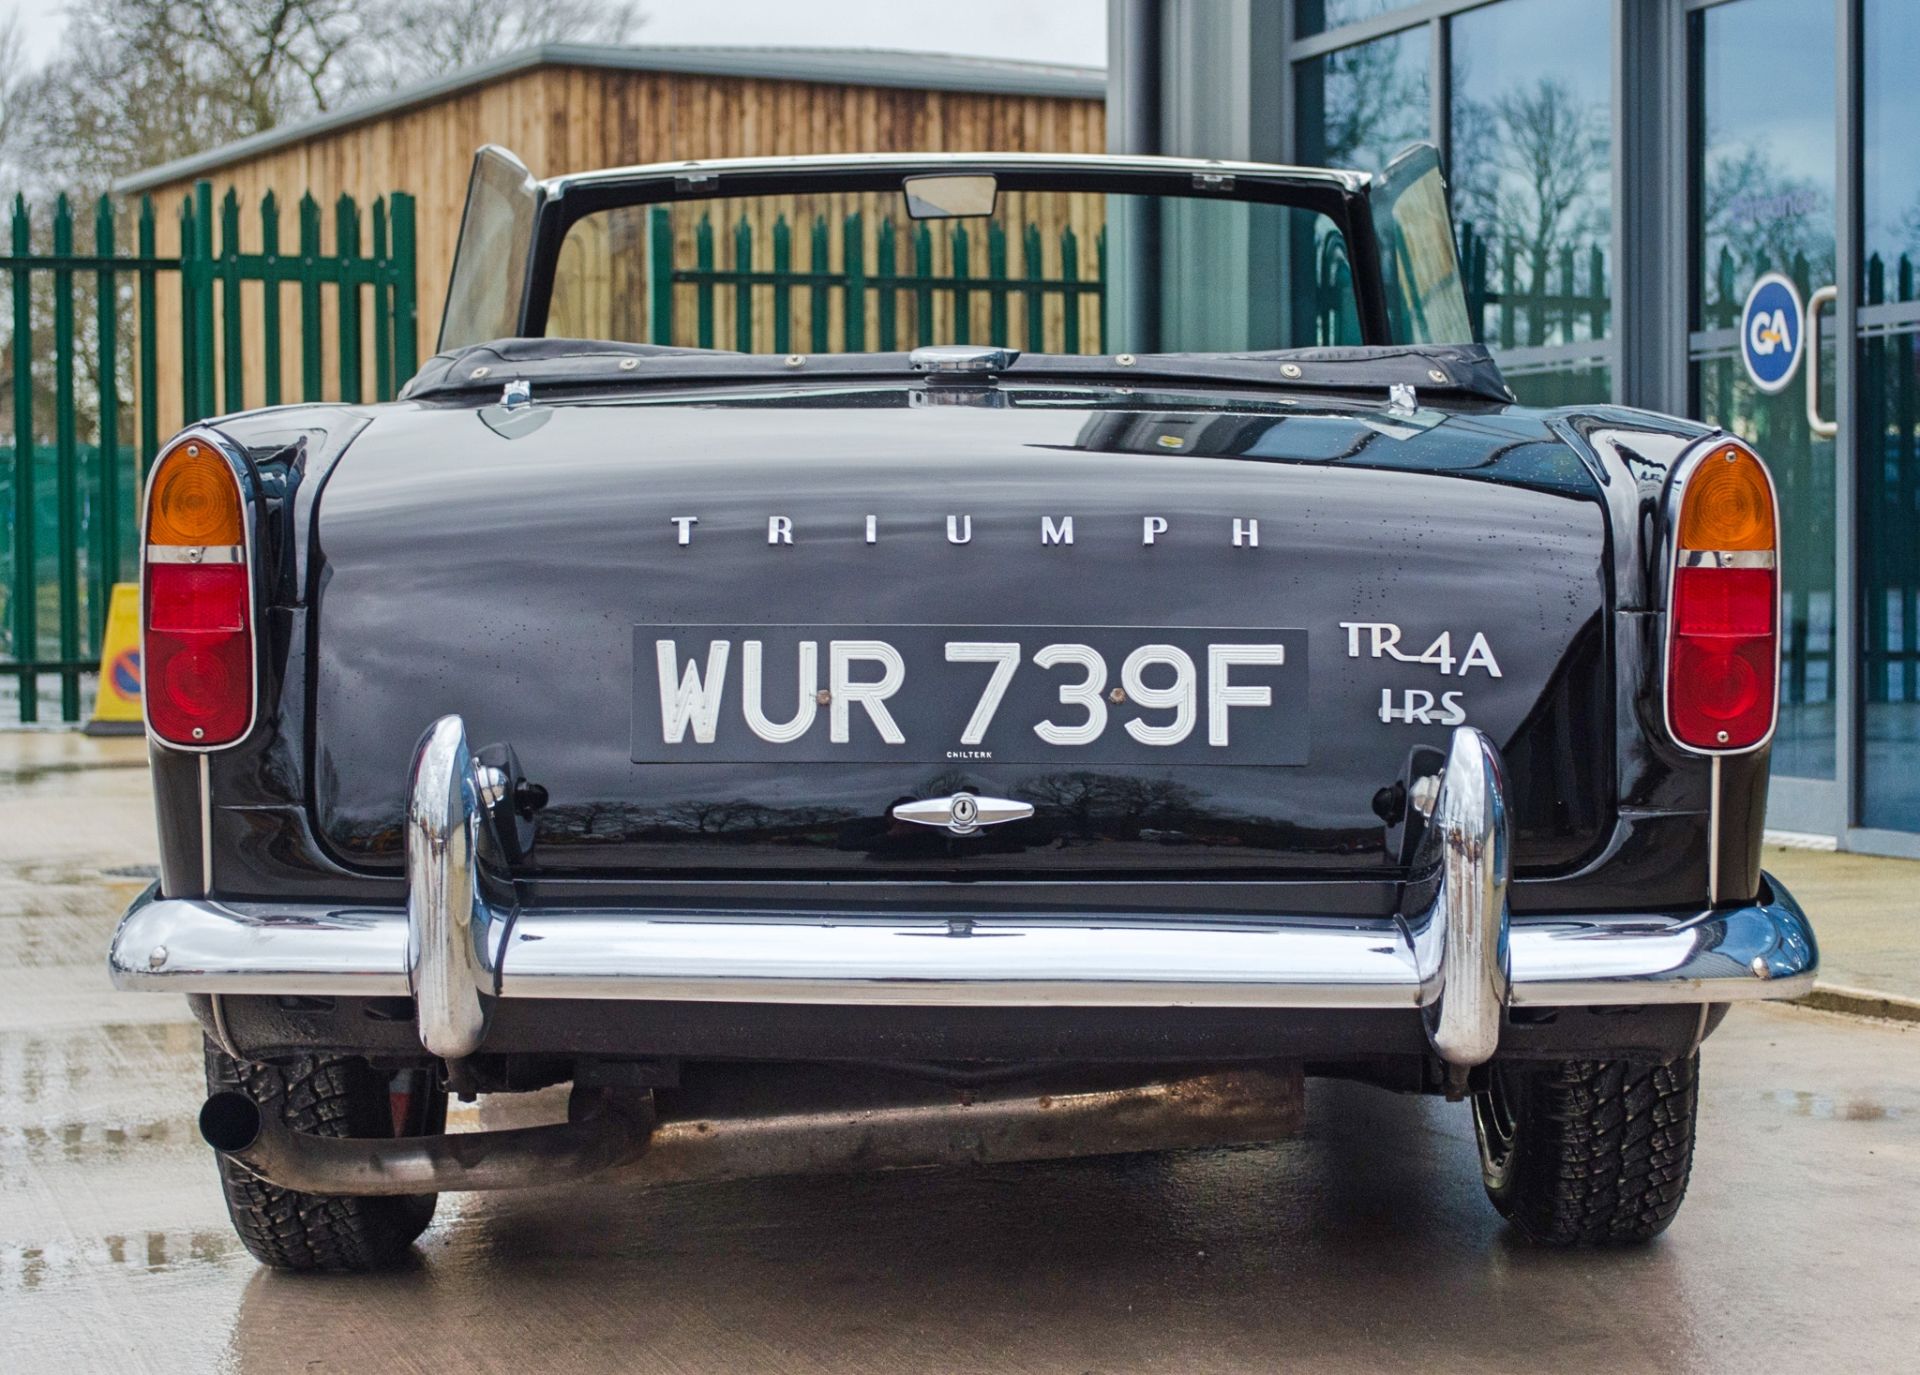 1967 Triumph TR4A IRS 2135cc convertible - Image 11 of 56